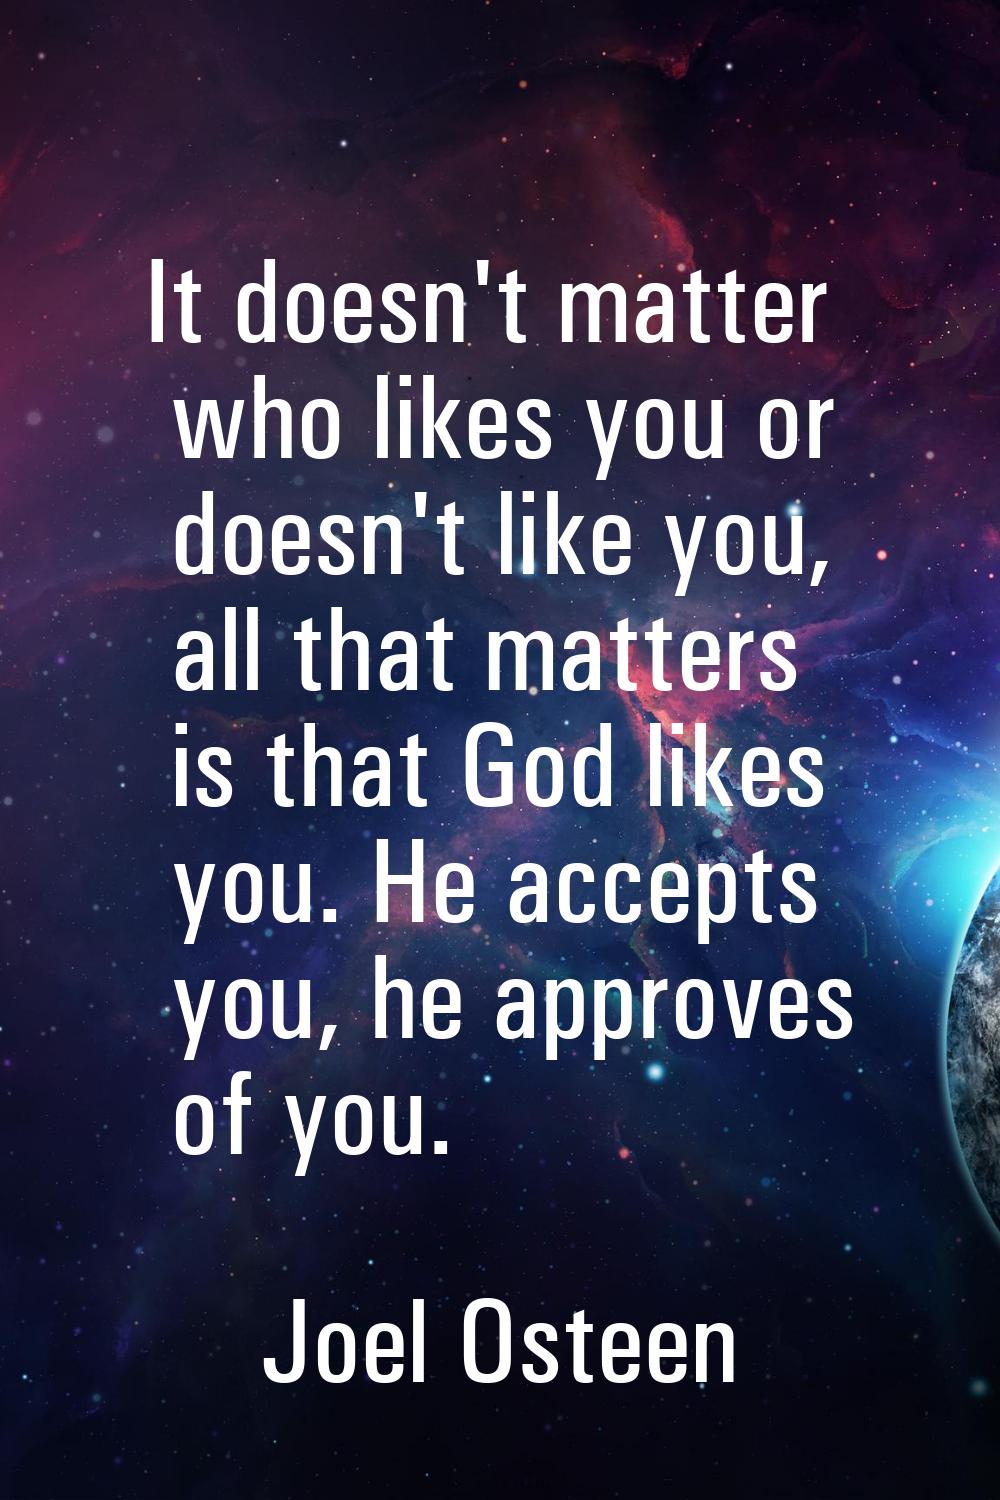 It doesn't matter who likes you or doesn't like you, all that matters is that God likes you. He acc